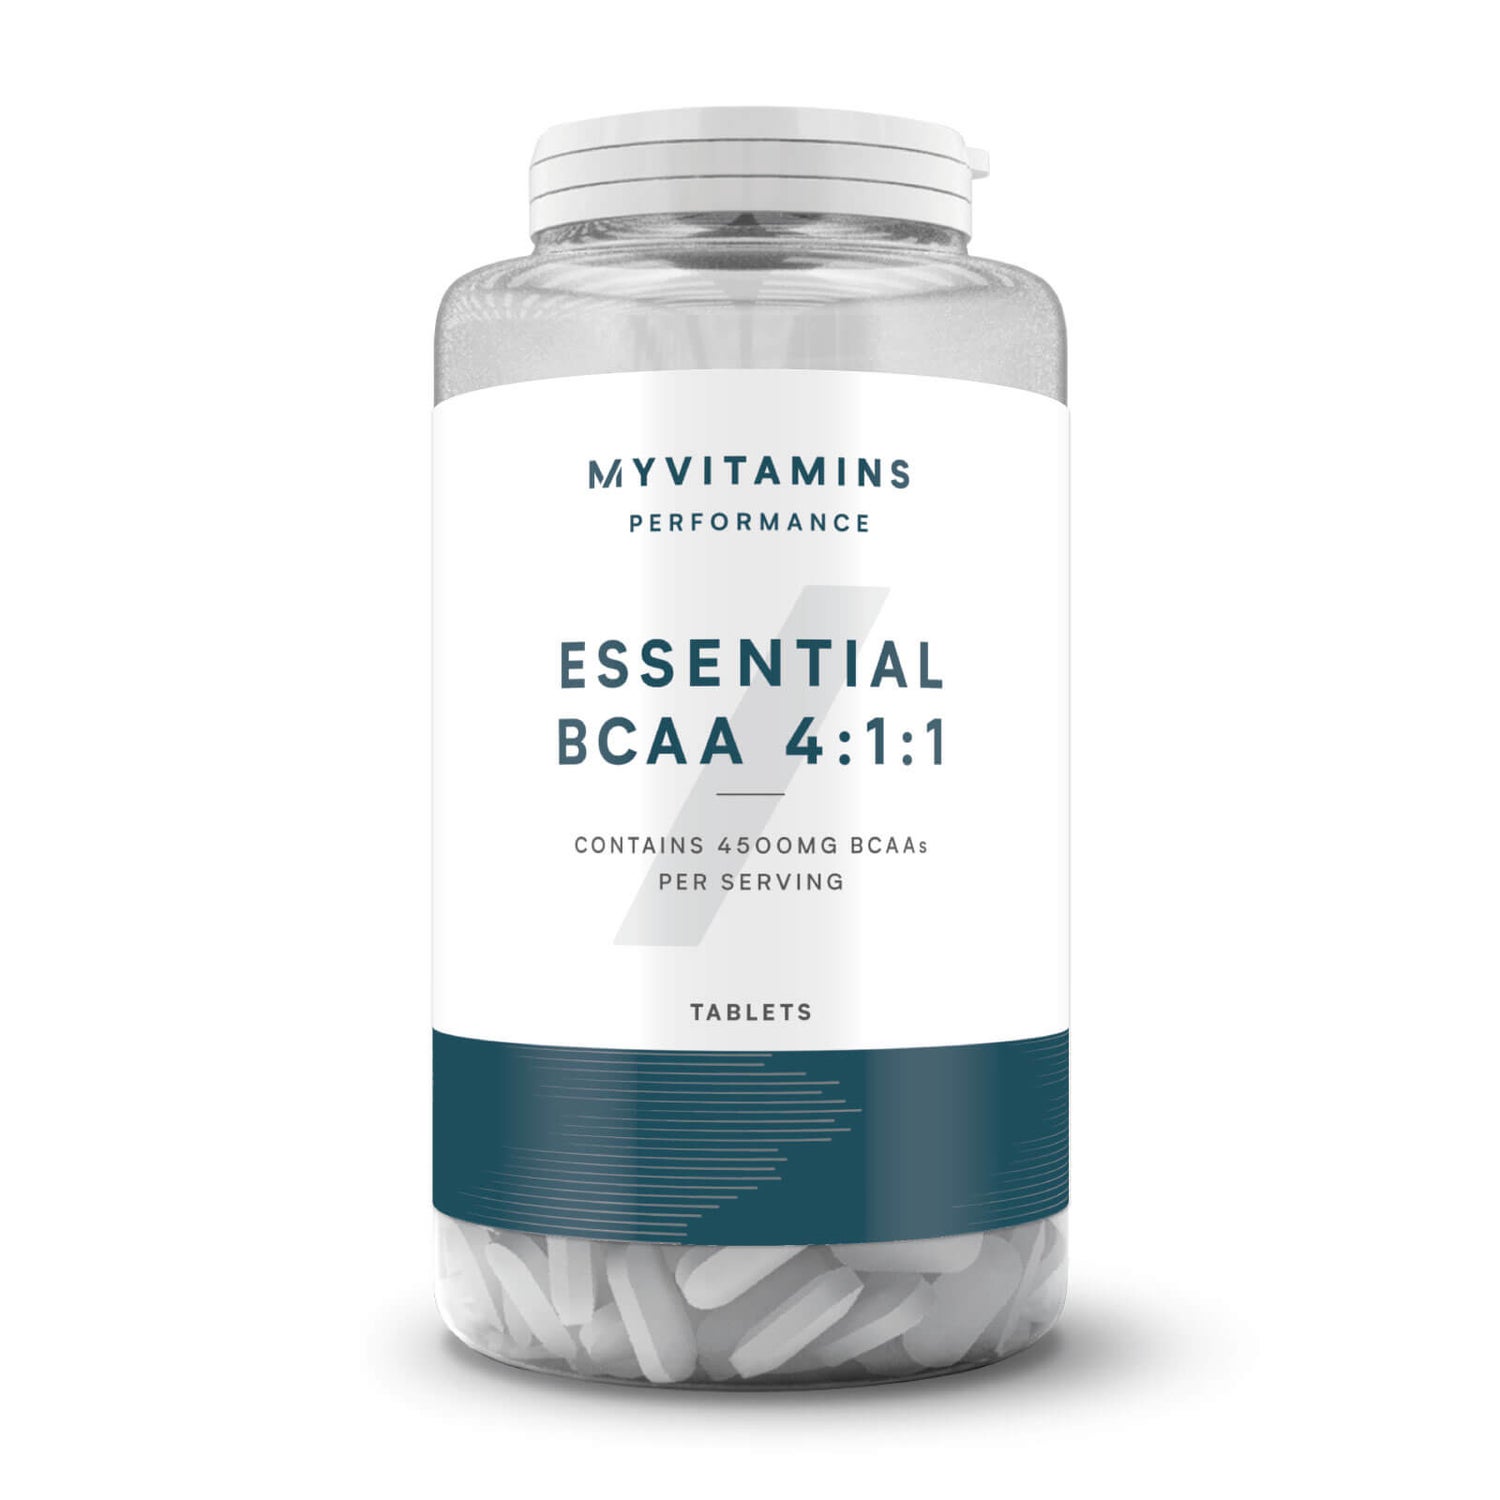 Essential BCAA 4:1:1 Tablets - 120Tablets